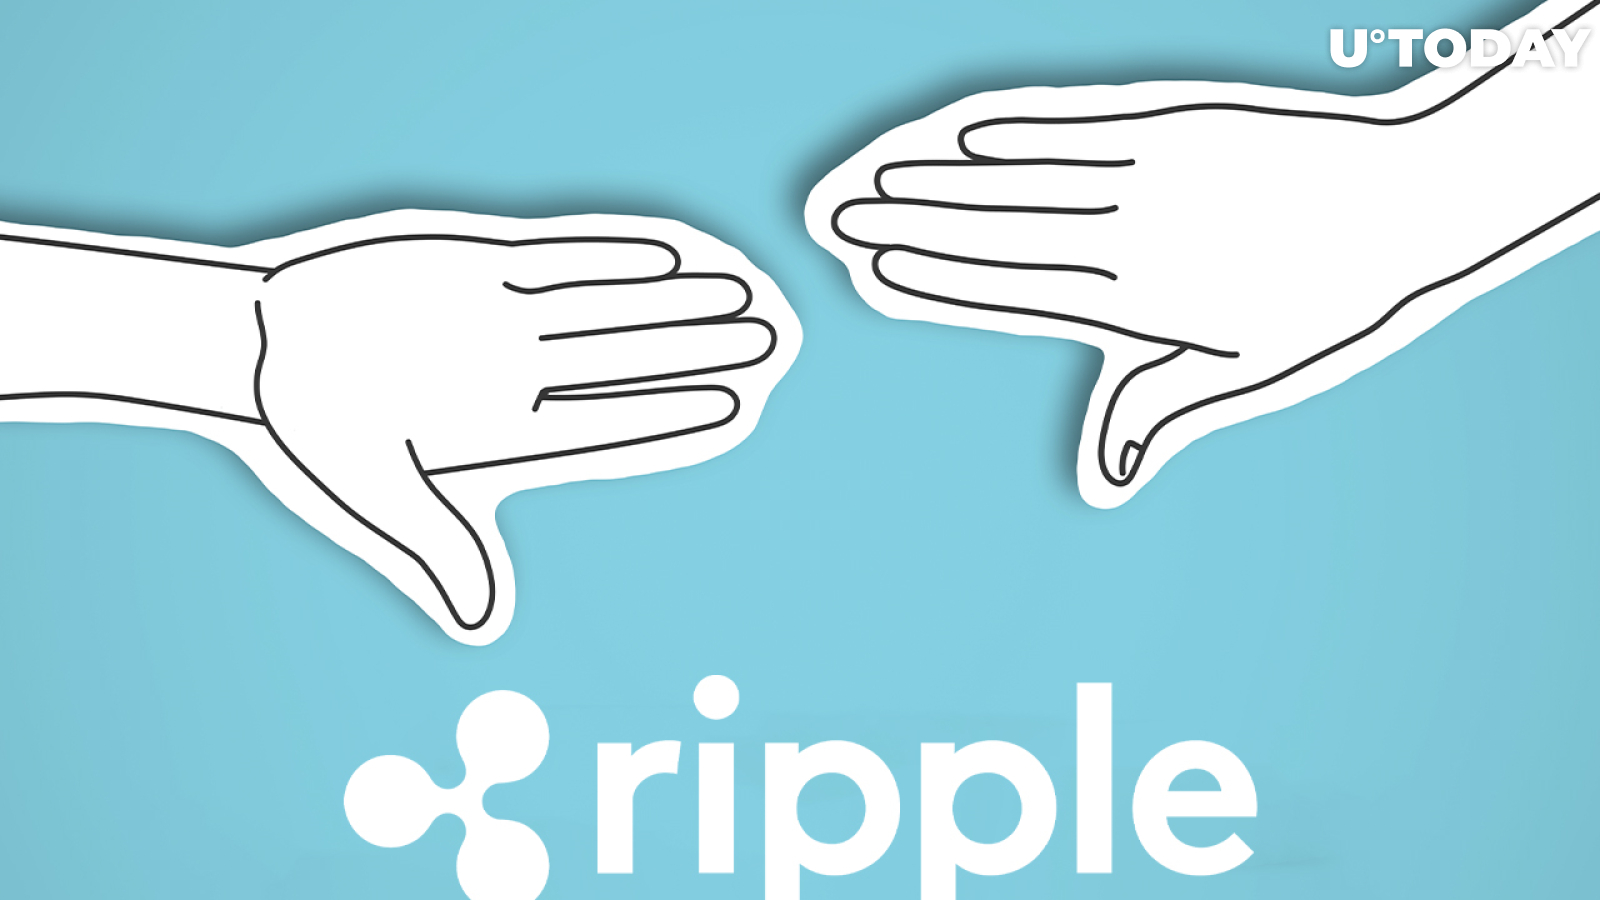 Ripple (XRP) Seeks to Collaborate with Congress on Smart Cryptocurrency Regulation: Details